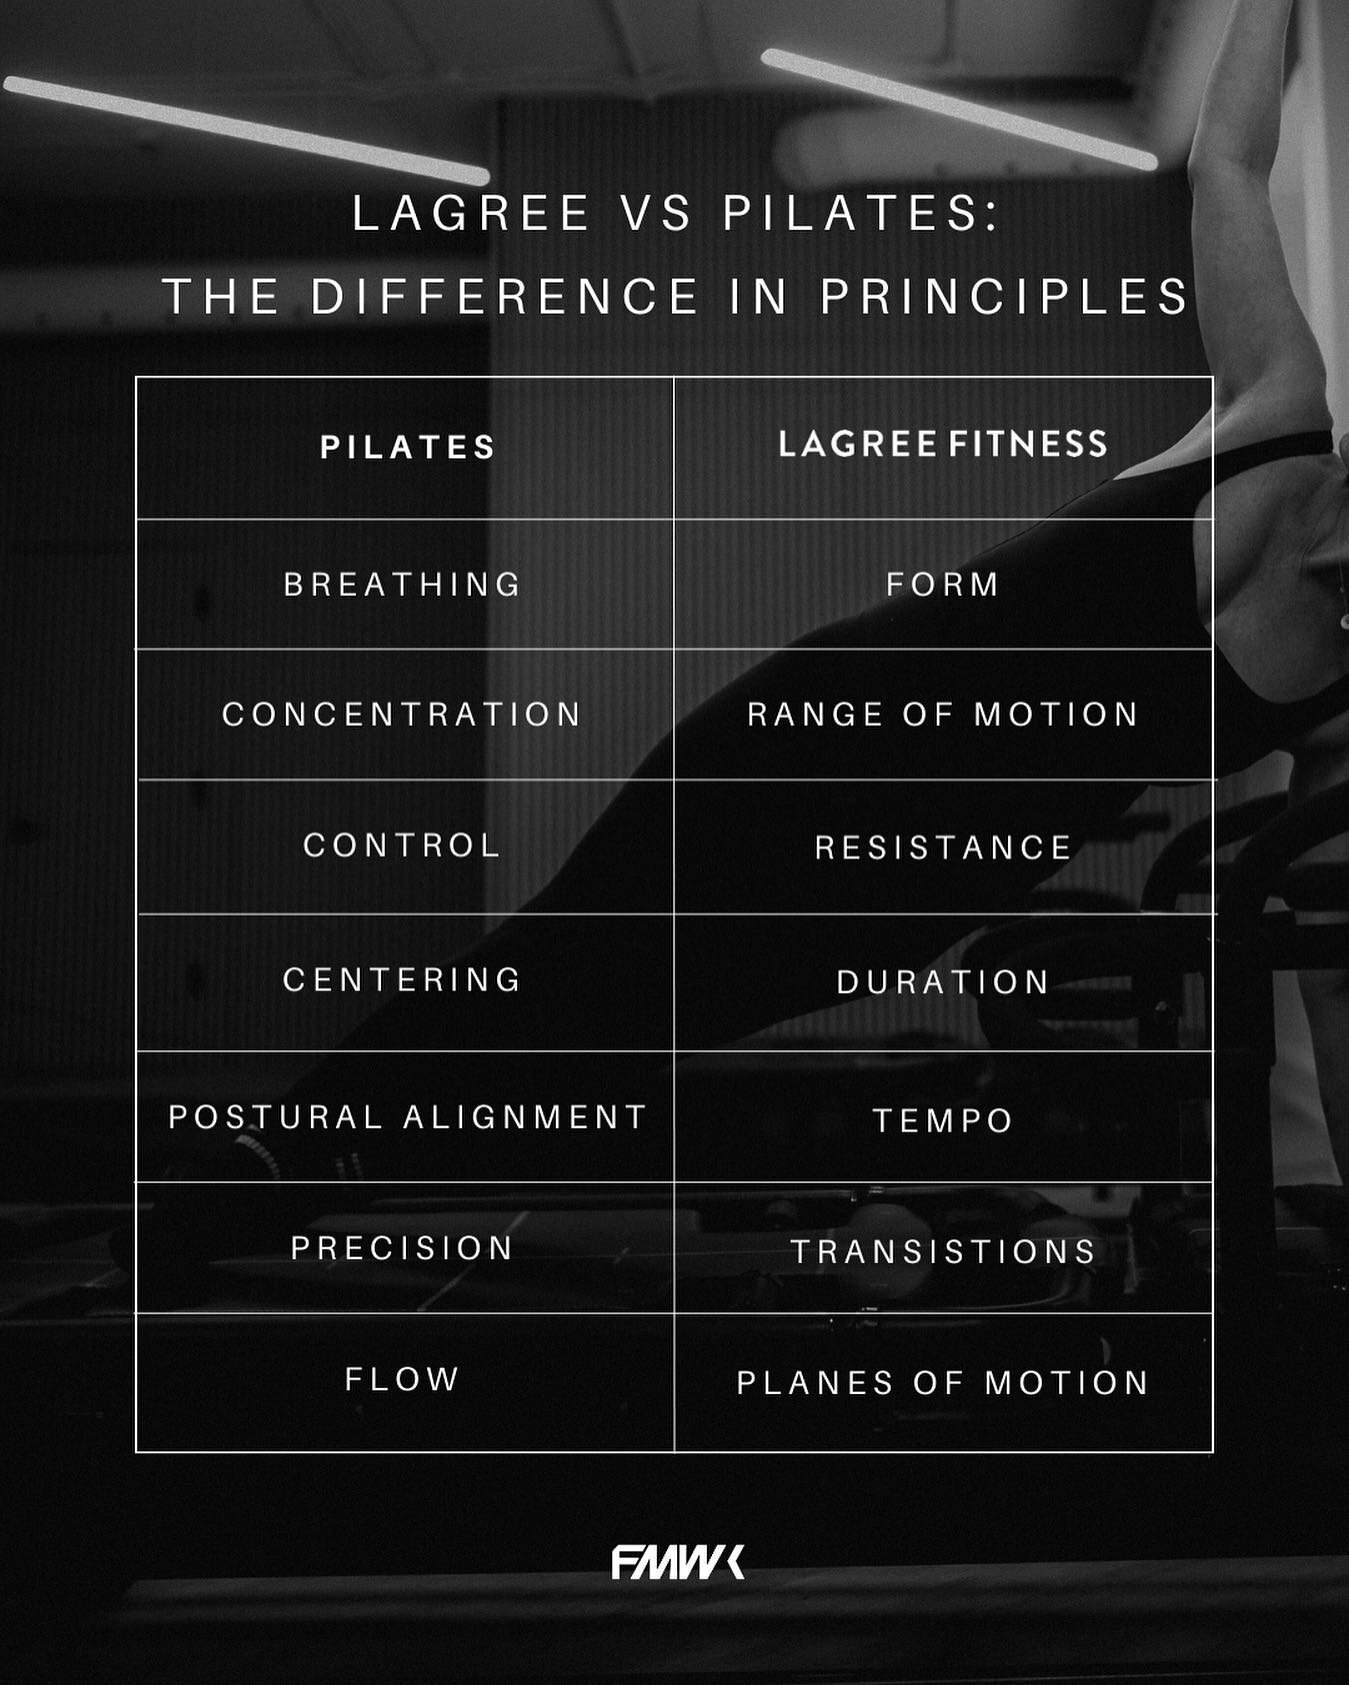 Lagree Fitness has distinguished itself from every form of exercise, including Pilates.
⁣
The Lagree Method utilizes tried and proven bodybuilding training techniques to effectively combine strength training with endurance and core.⁣
⁣
The union of t